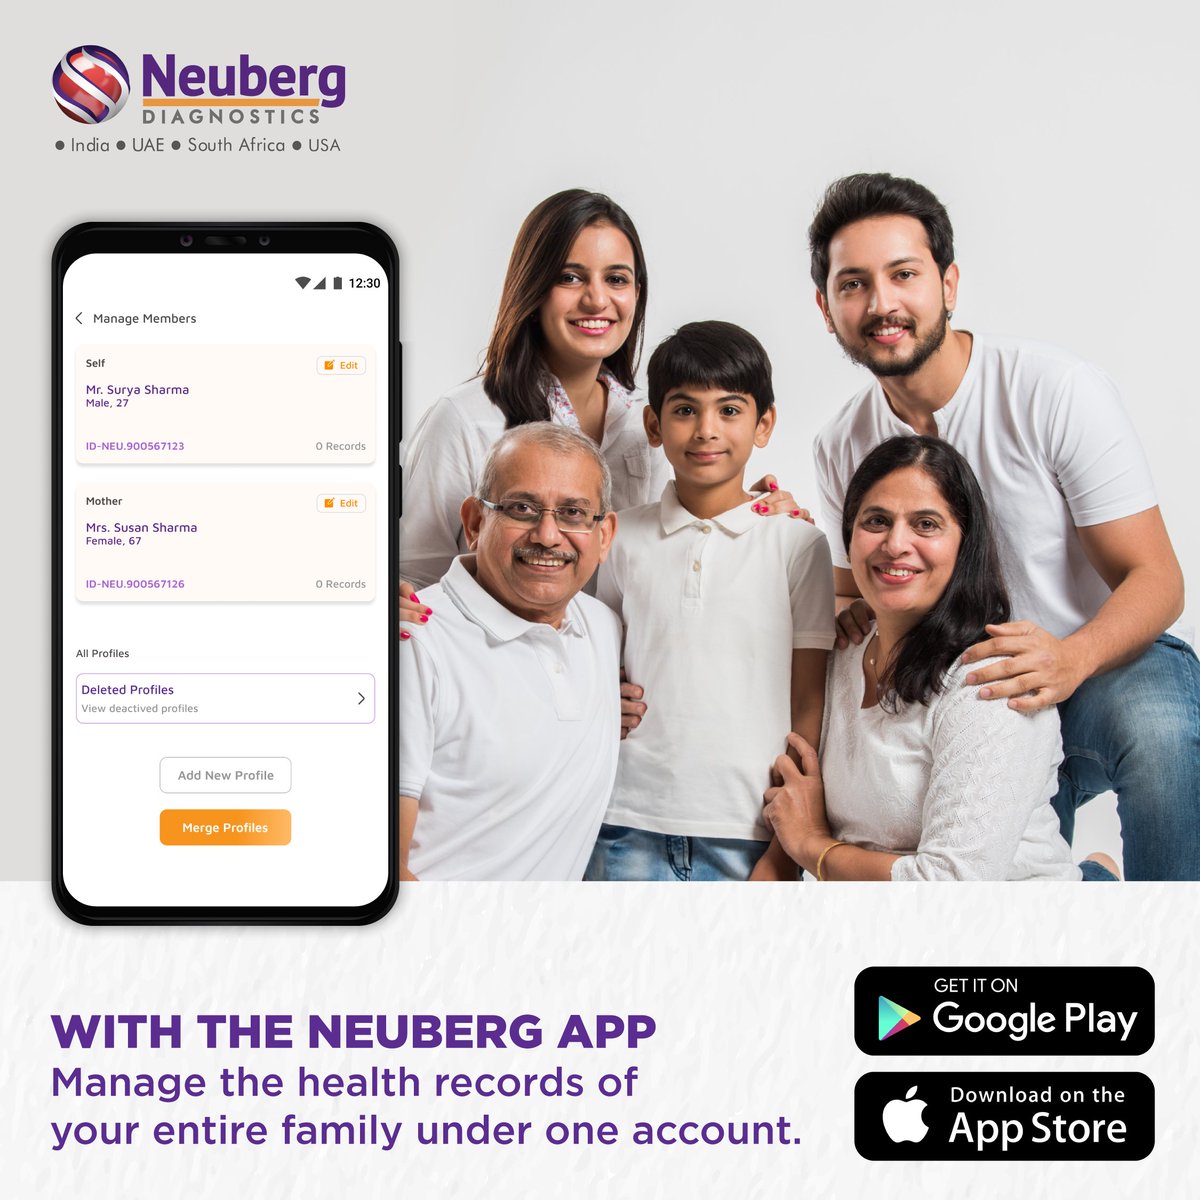 Simplify your family's health management with one account! Keep everyone's records in one place for easy access and peace of mind. Download our app today! #FamilyHealth #Convenience